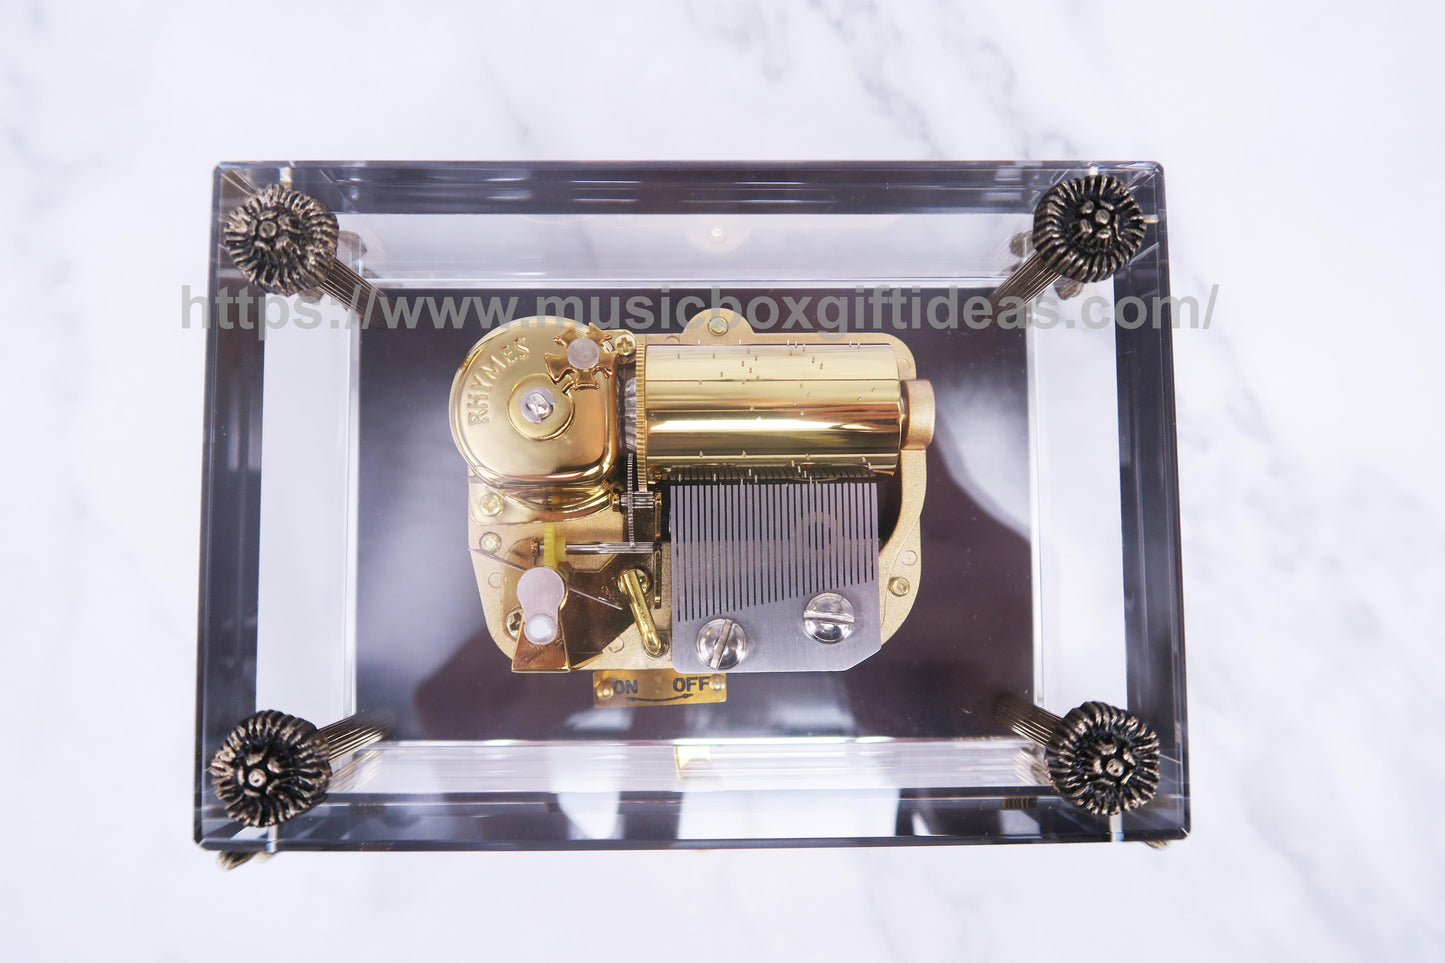 Twilight A Thousand Years from Christina Perri 30-Note Wind-Up Music Box Gift (Crystal) - Music Box Gift Ideas